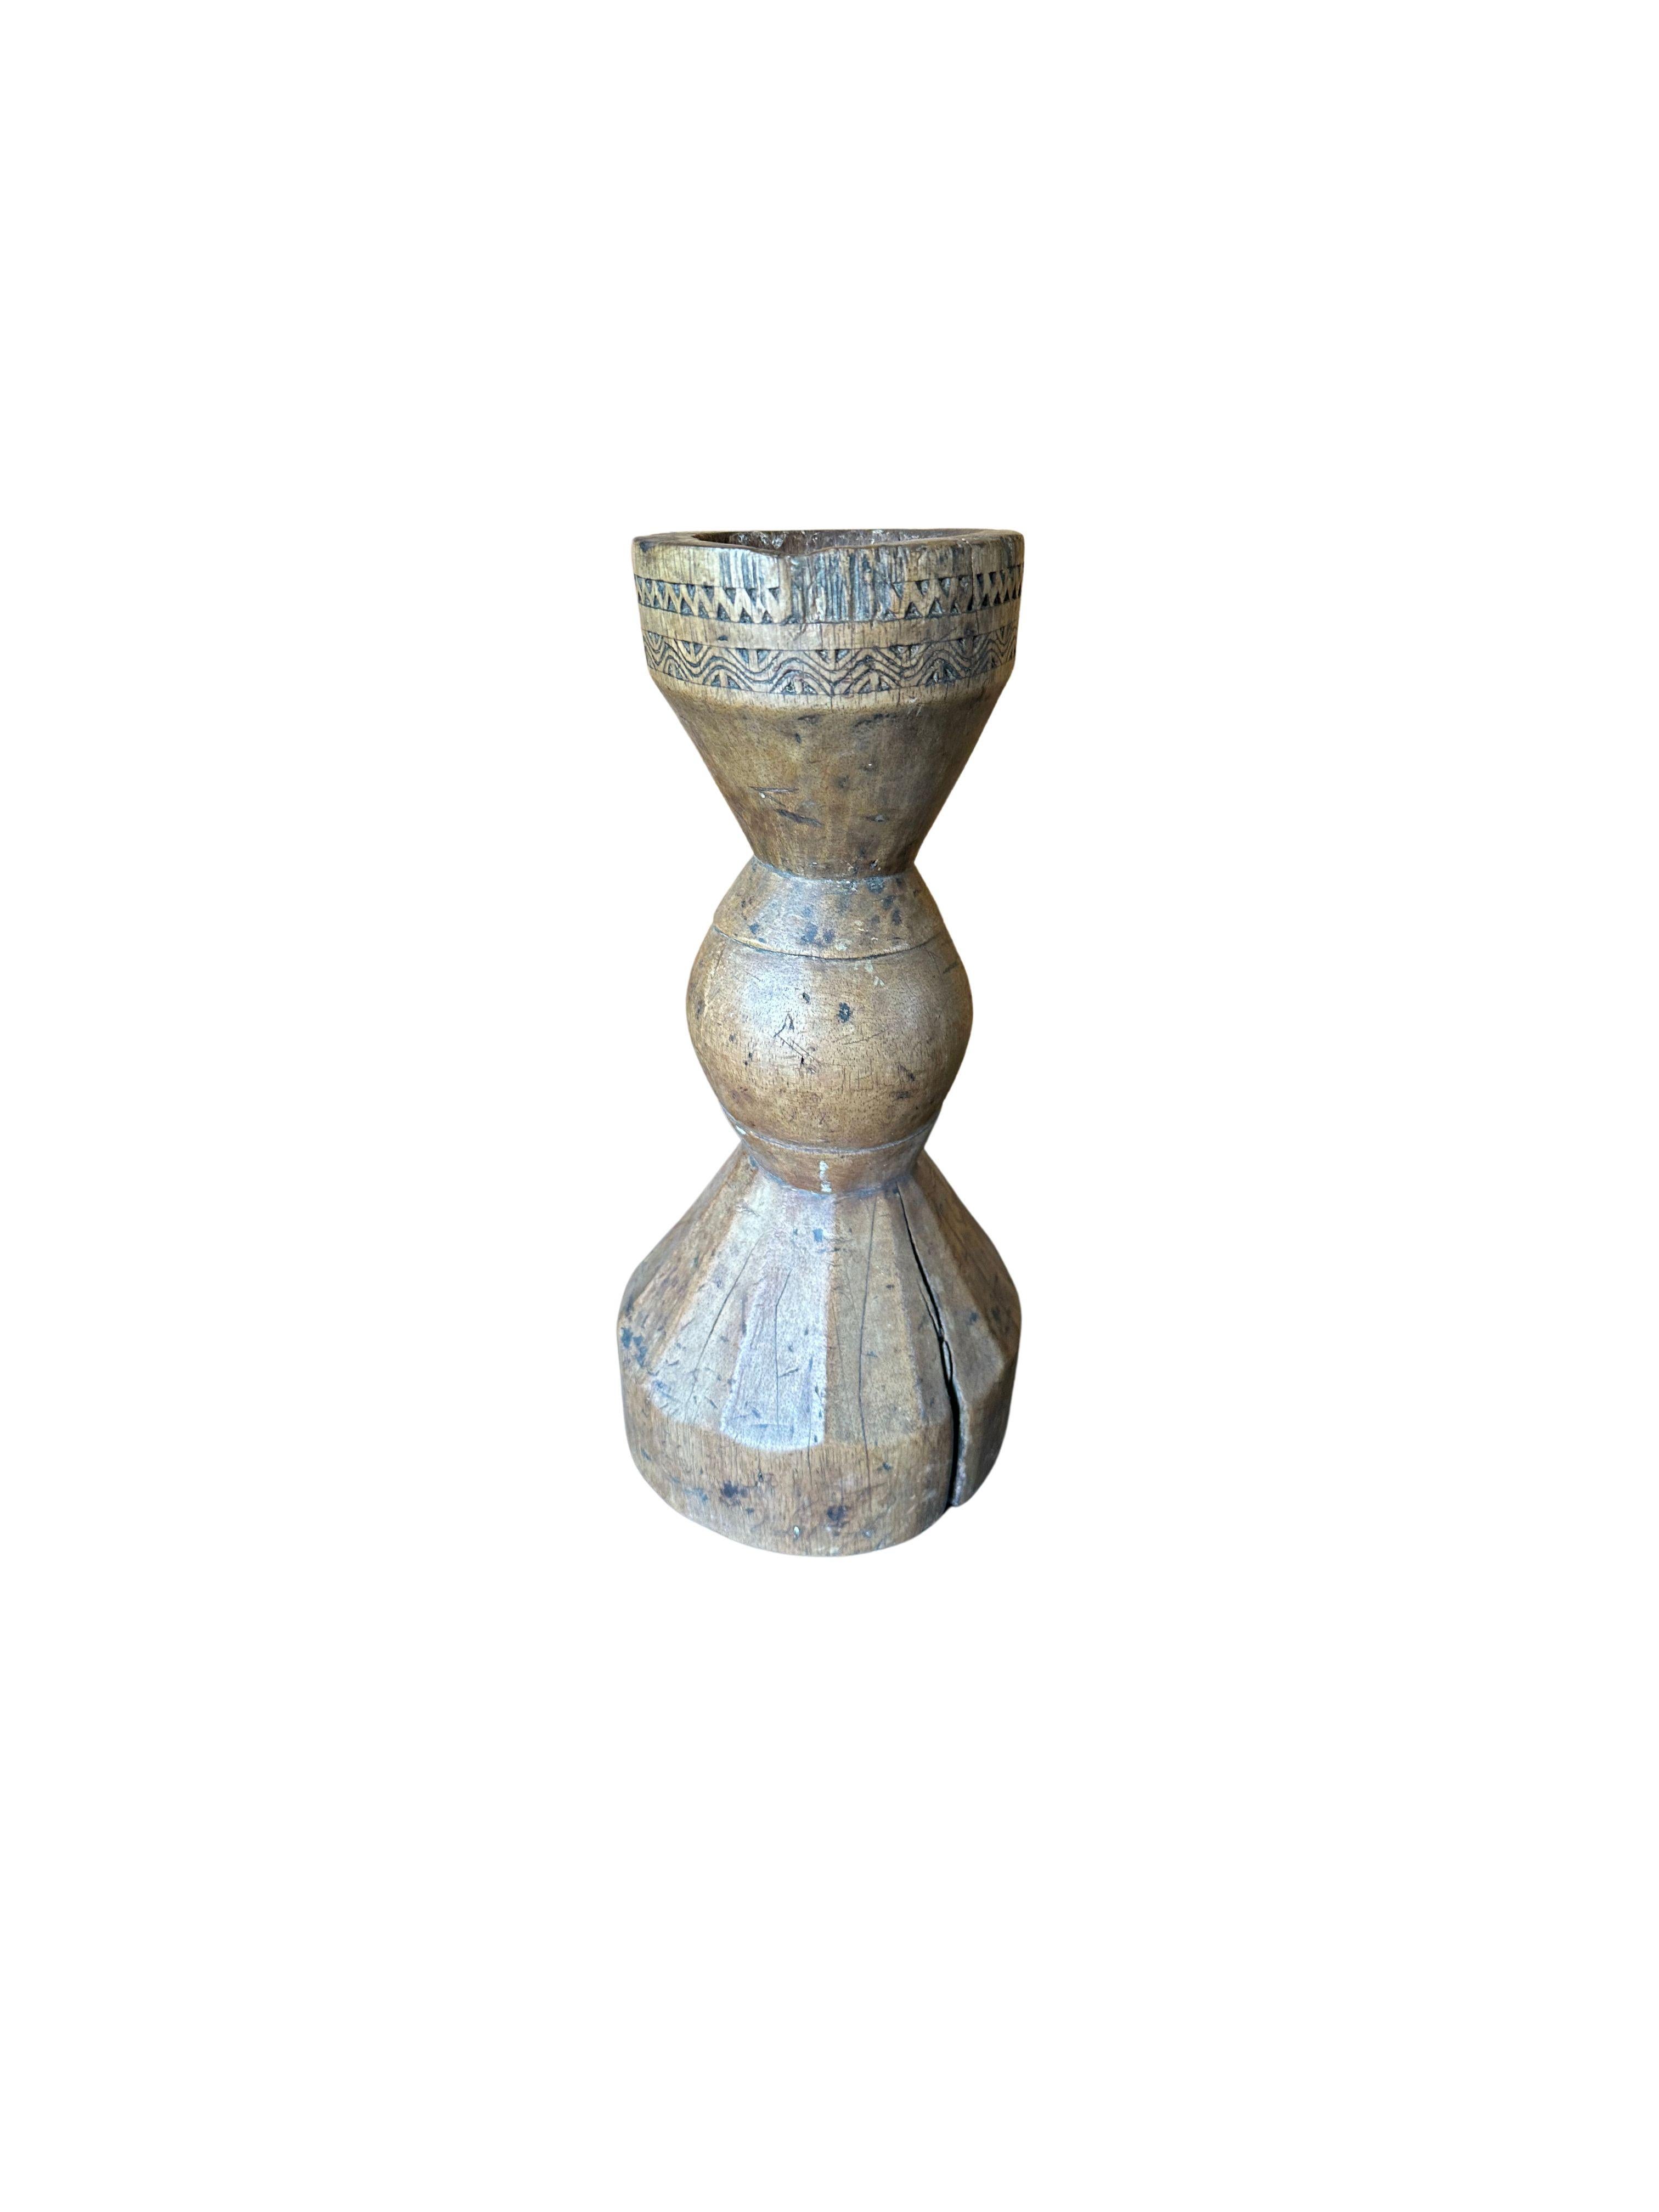 Hand-Crafted Vintage Wood Candle Holder with Carved Detailing, Java, c. 1950 For Sale